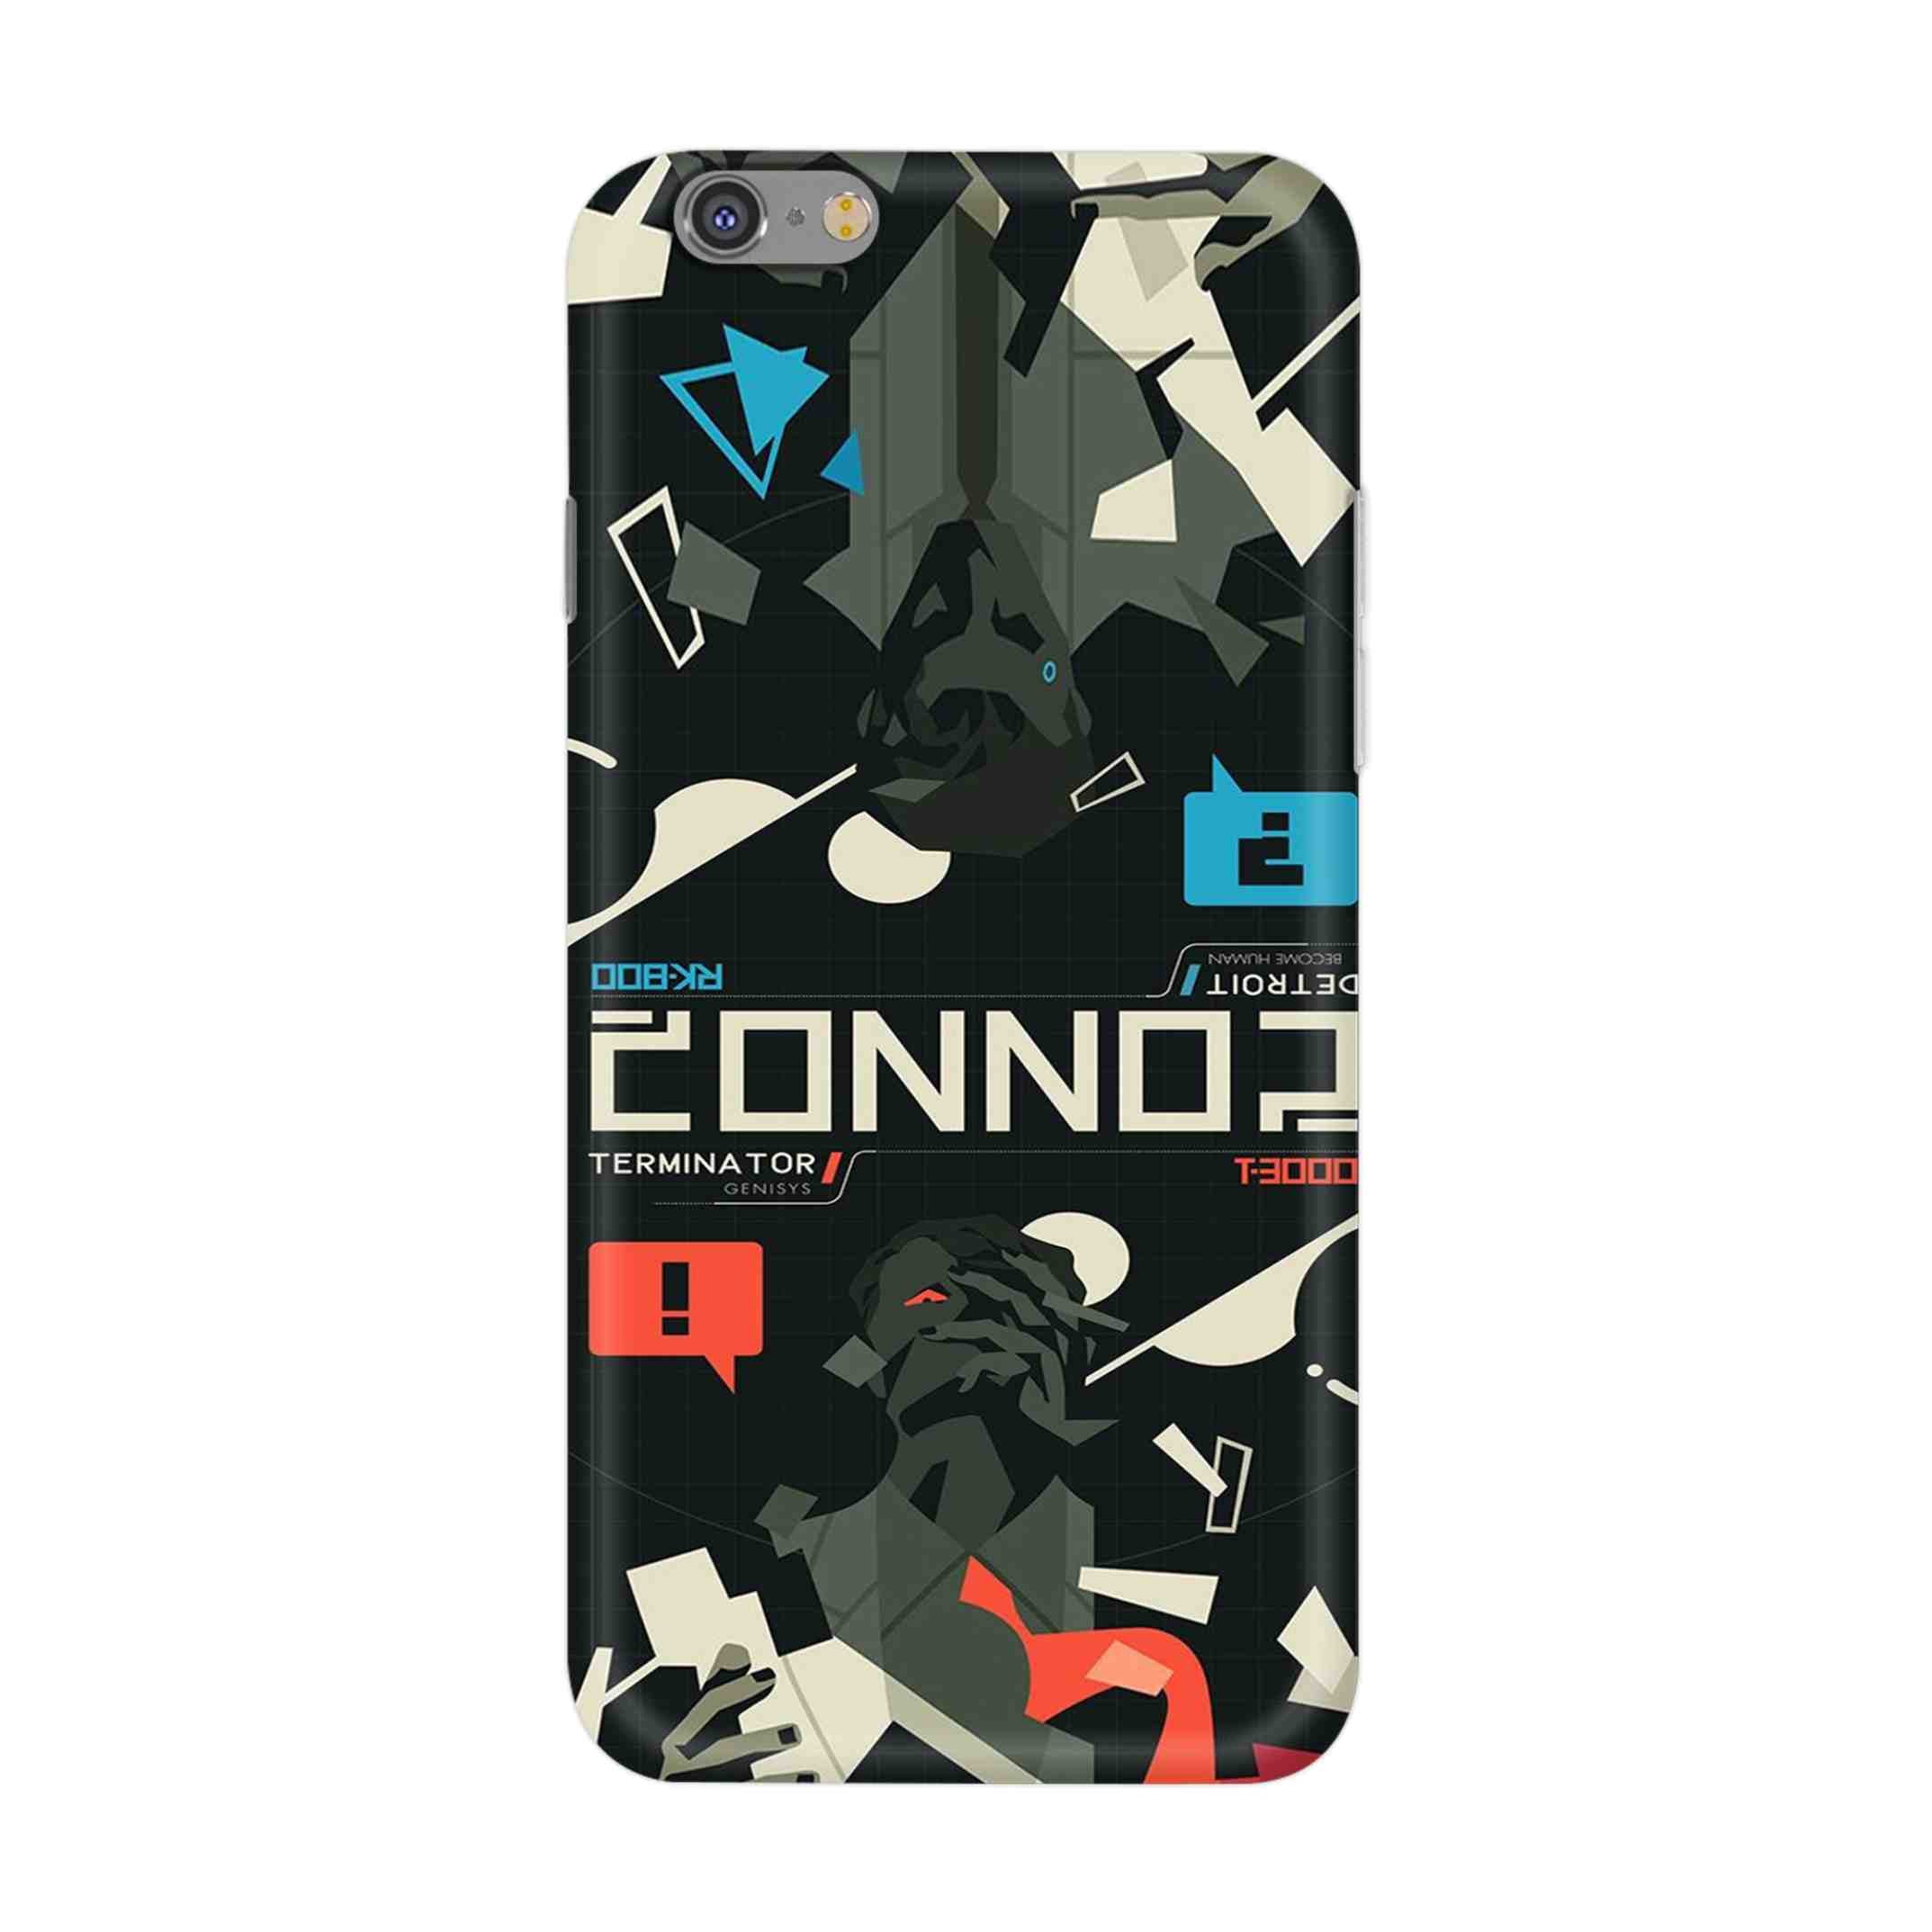 Buy Terminator Hard Back Mobile Phone Case/Cover For iPhone 6 / 6s Online